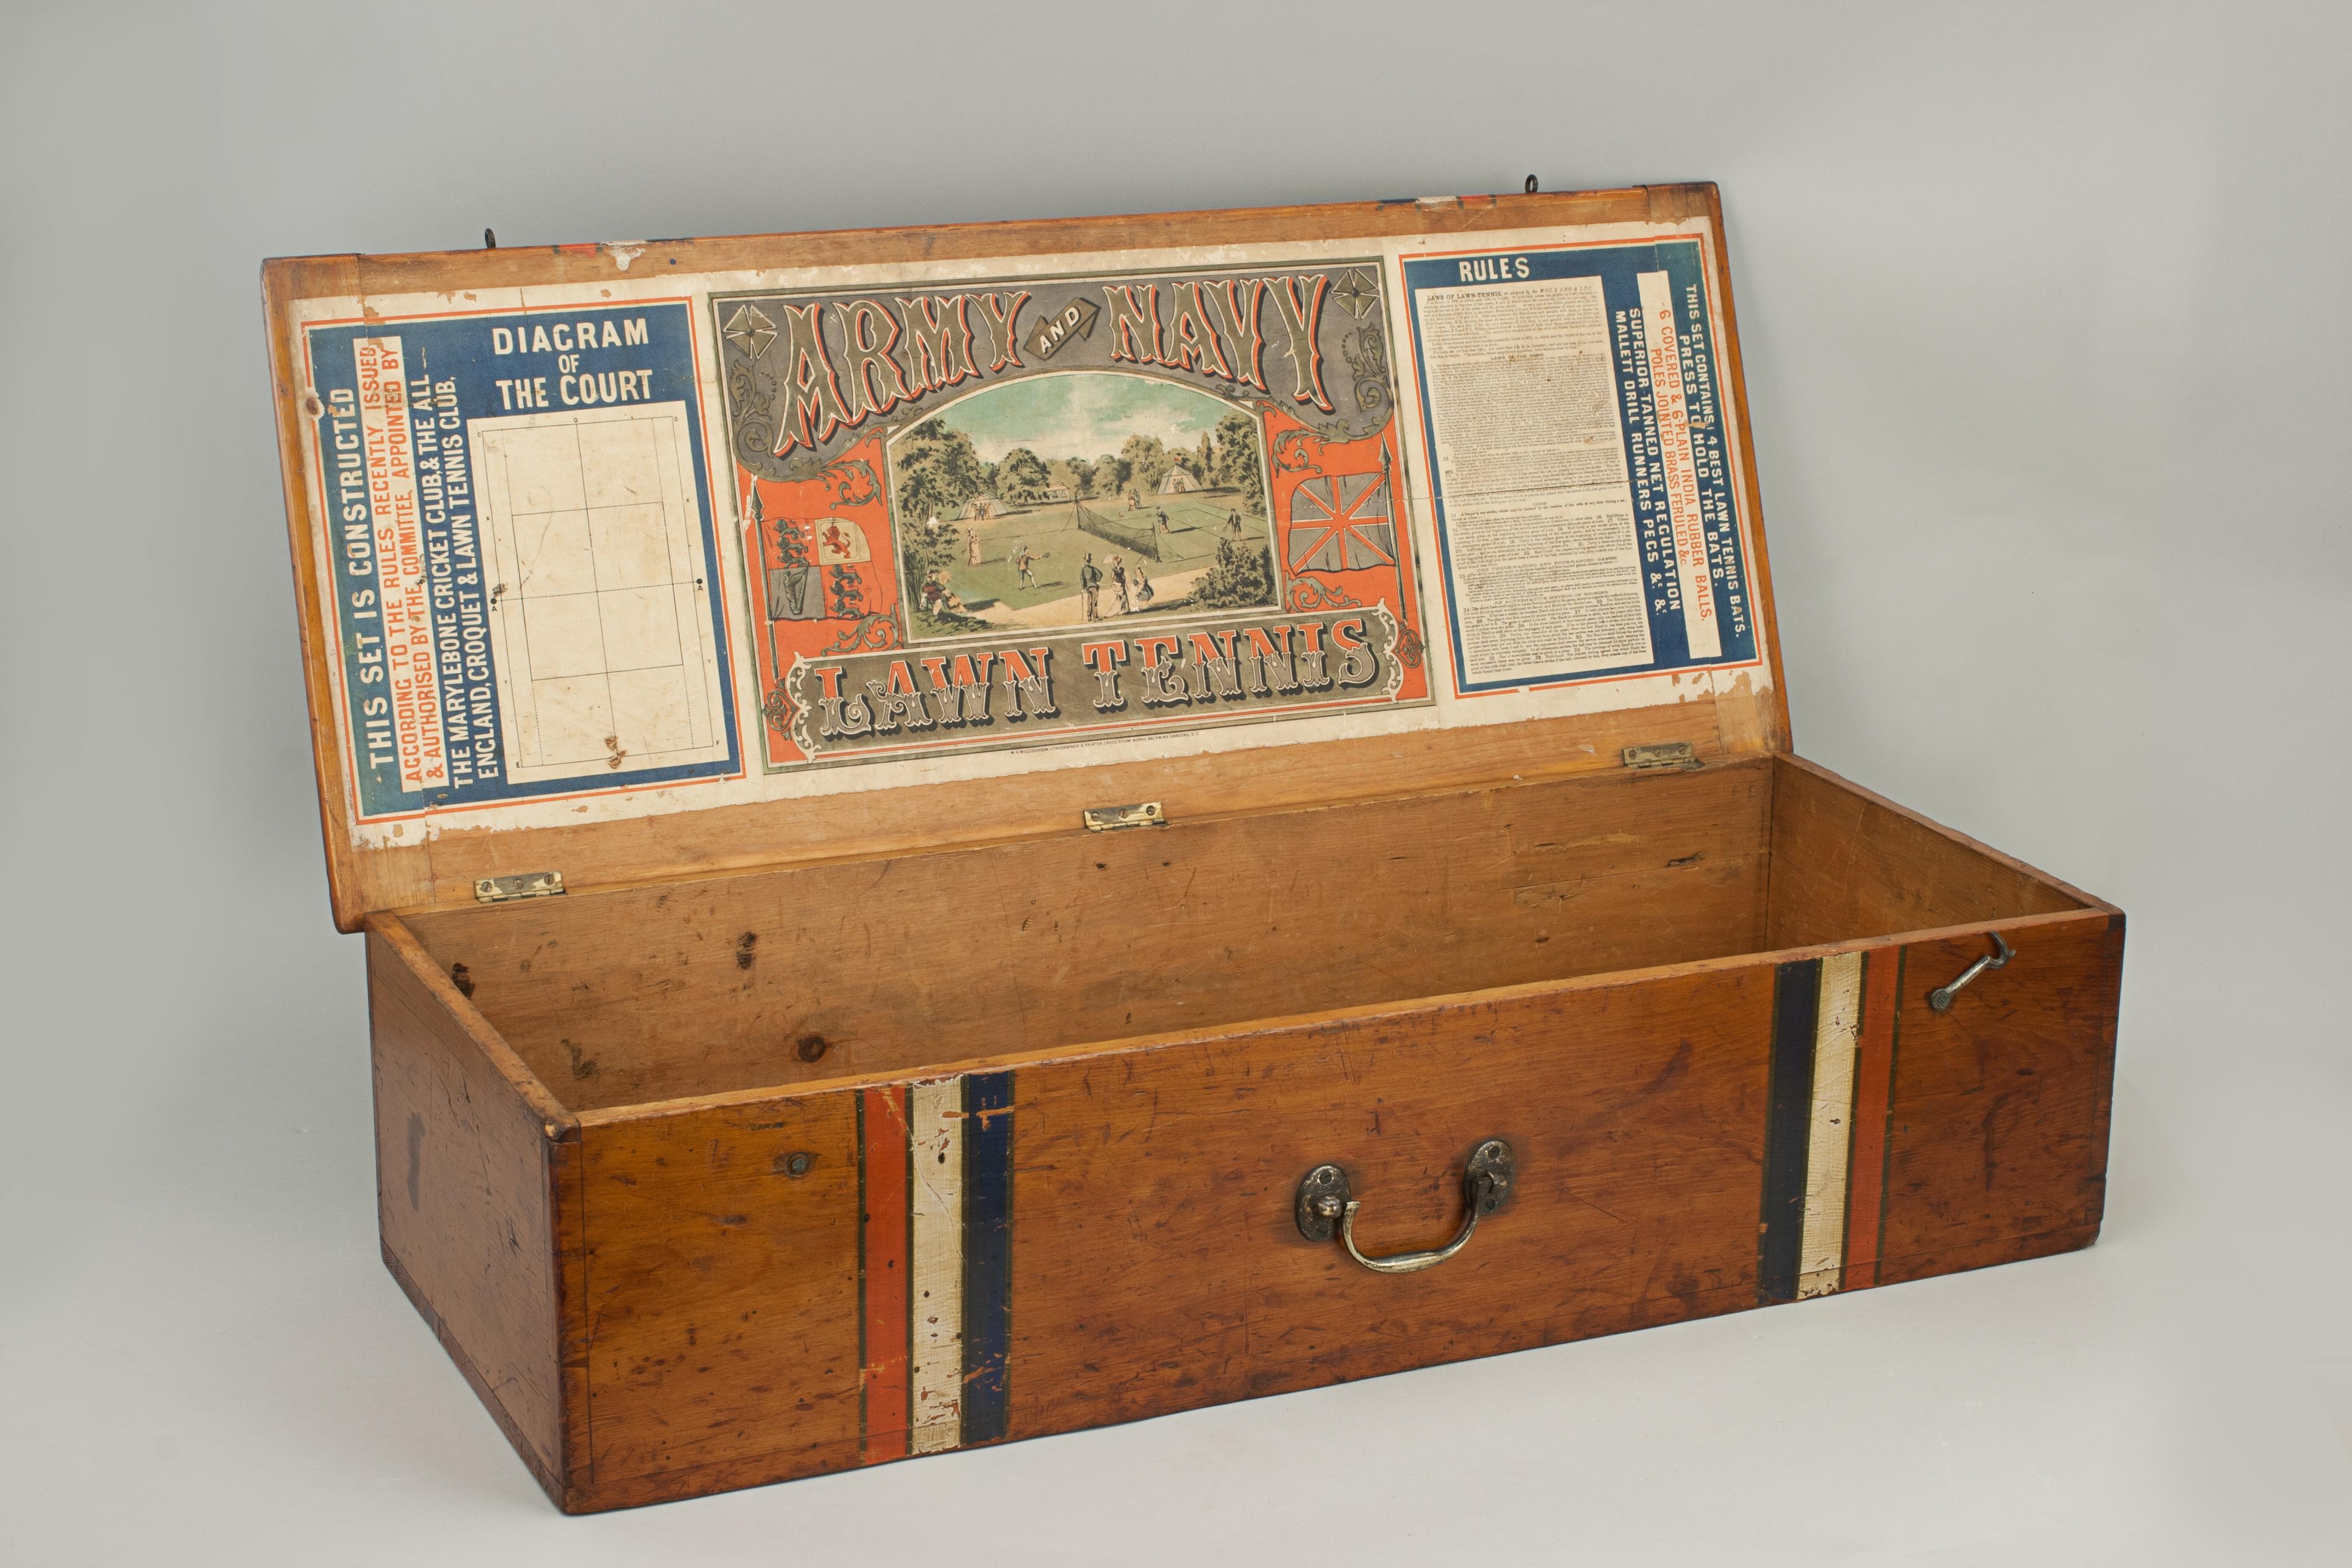 Antique Lawn Tennis Box with Poster, Army and Navy, 1870, s 6